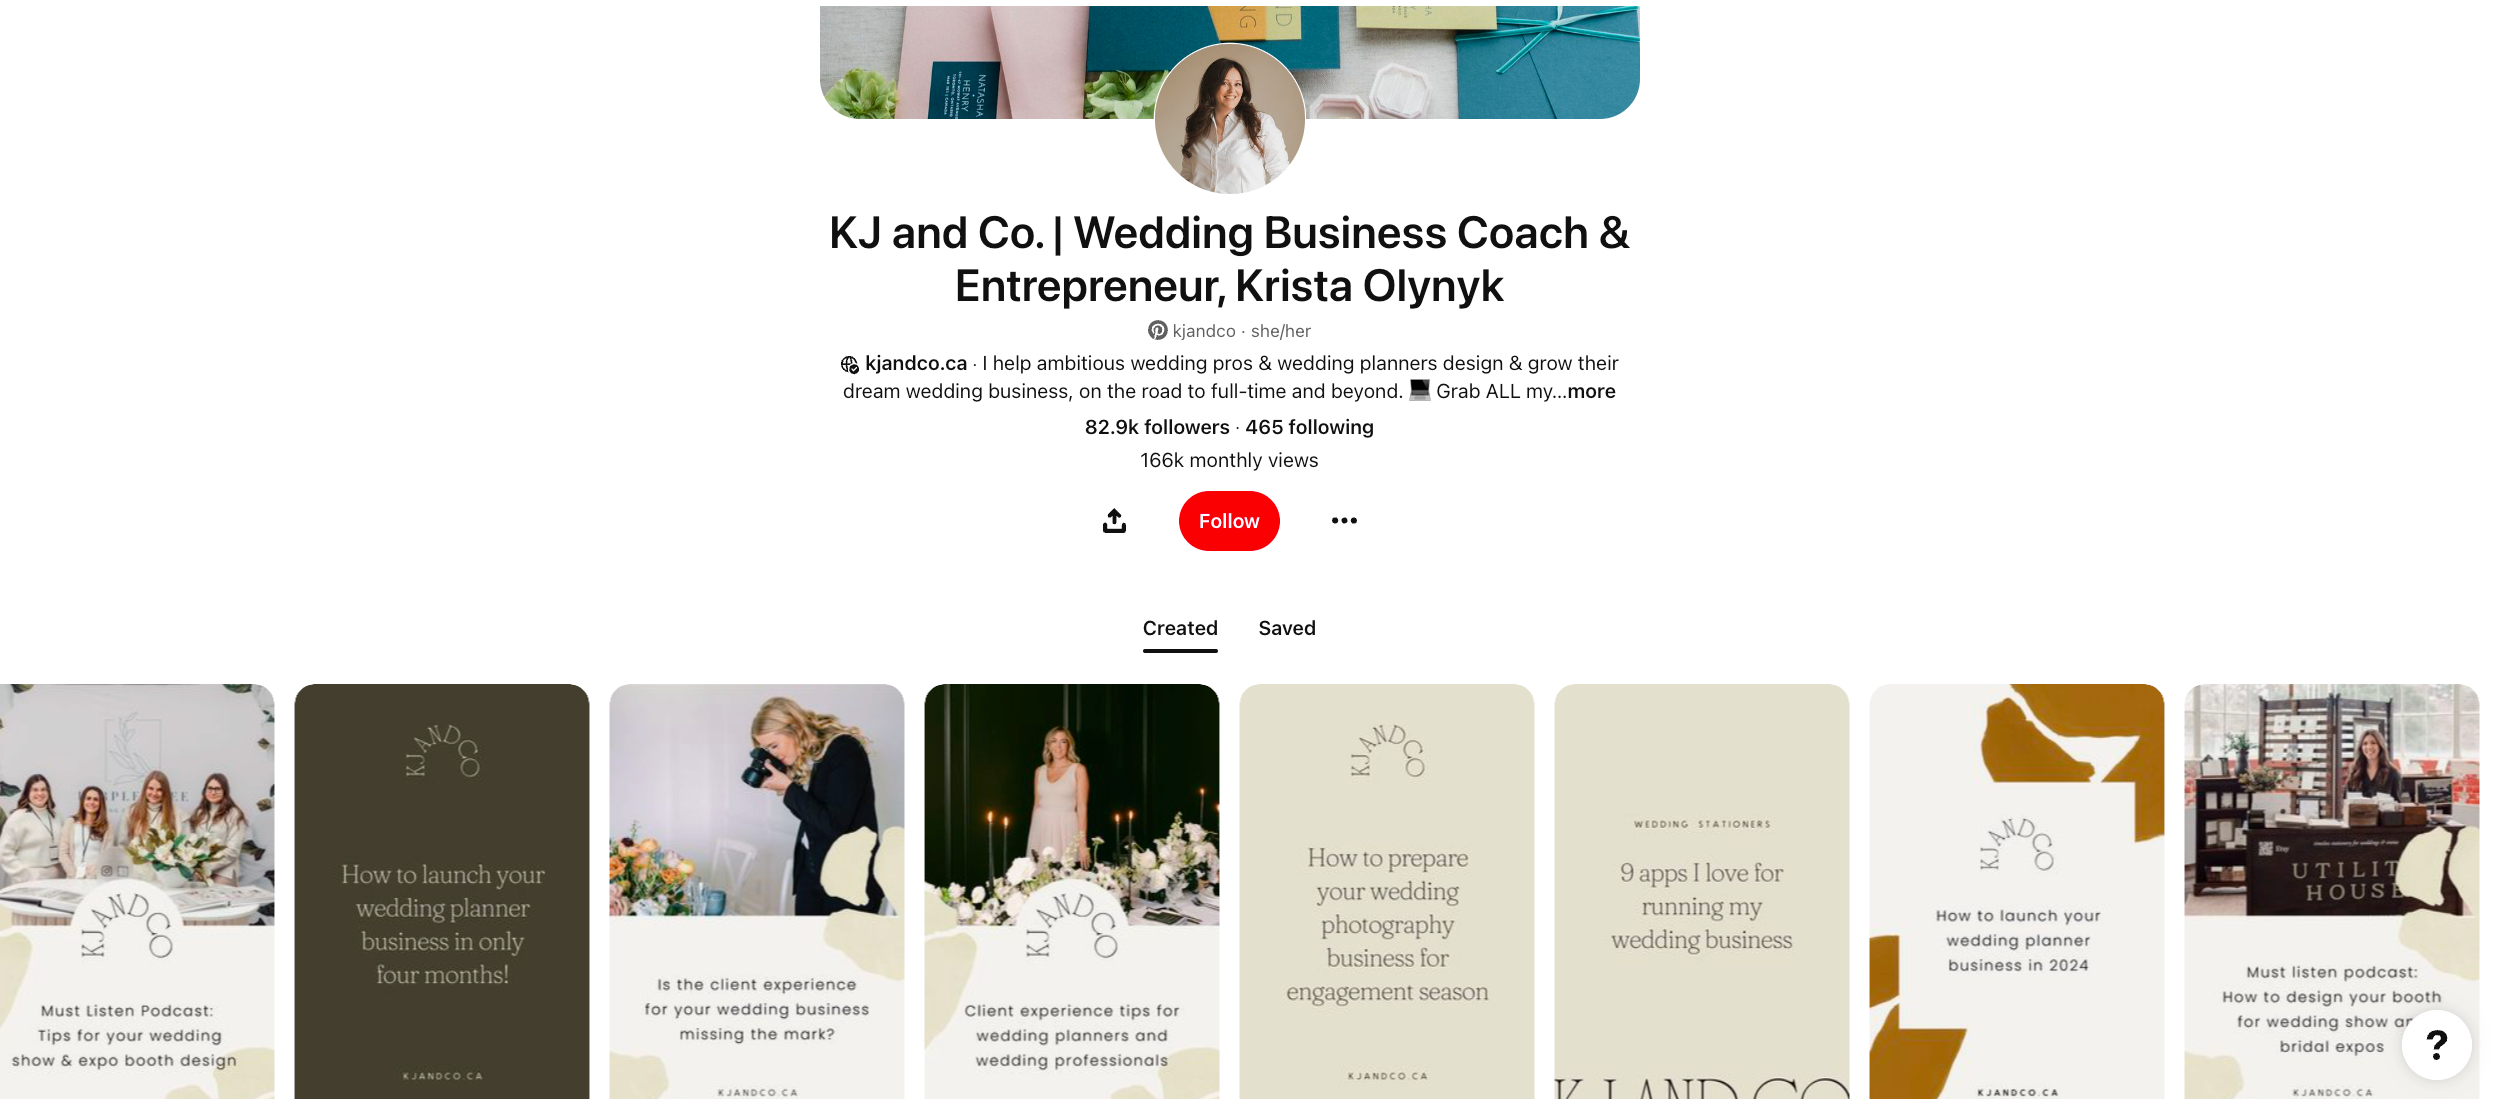 Success Story - KJ and Co